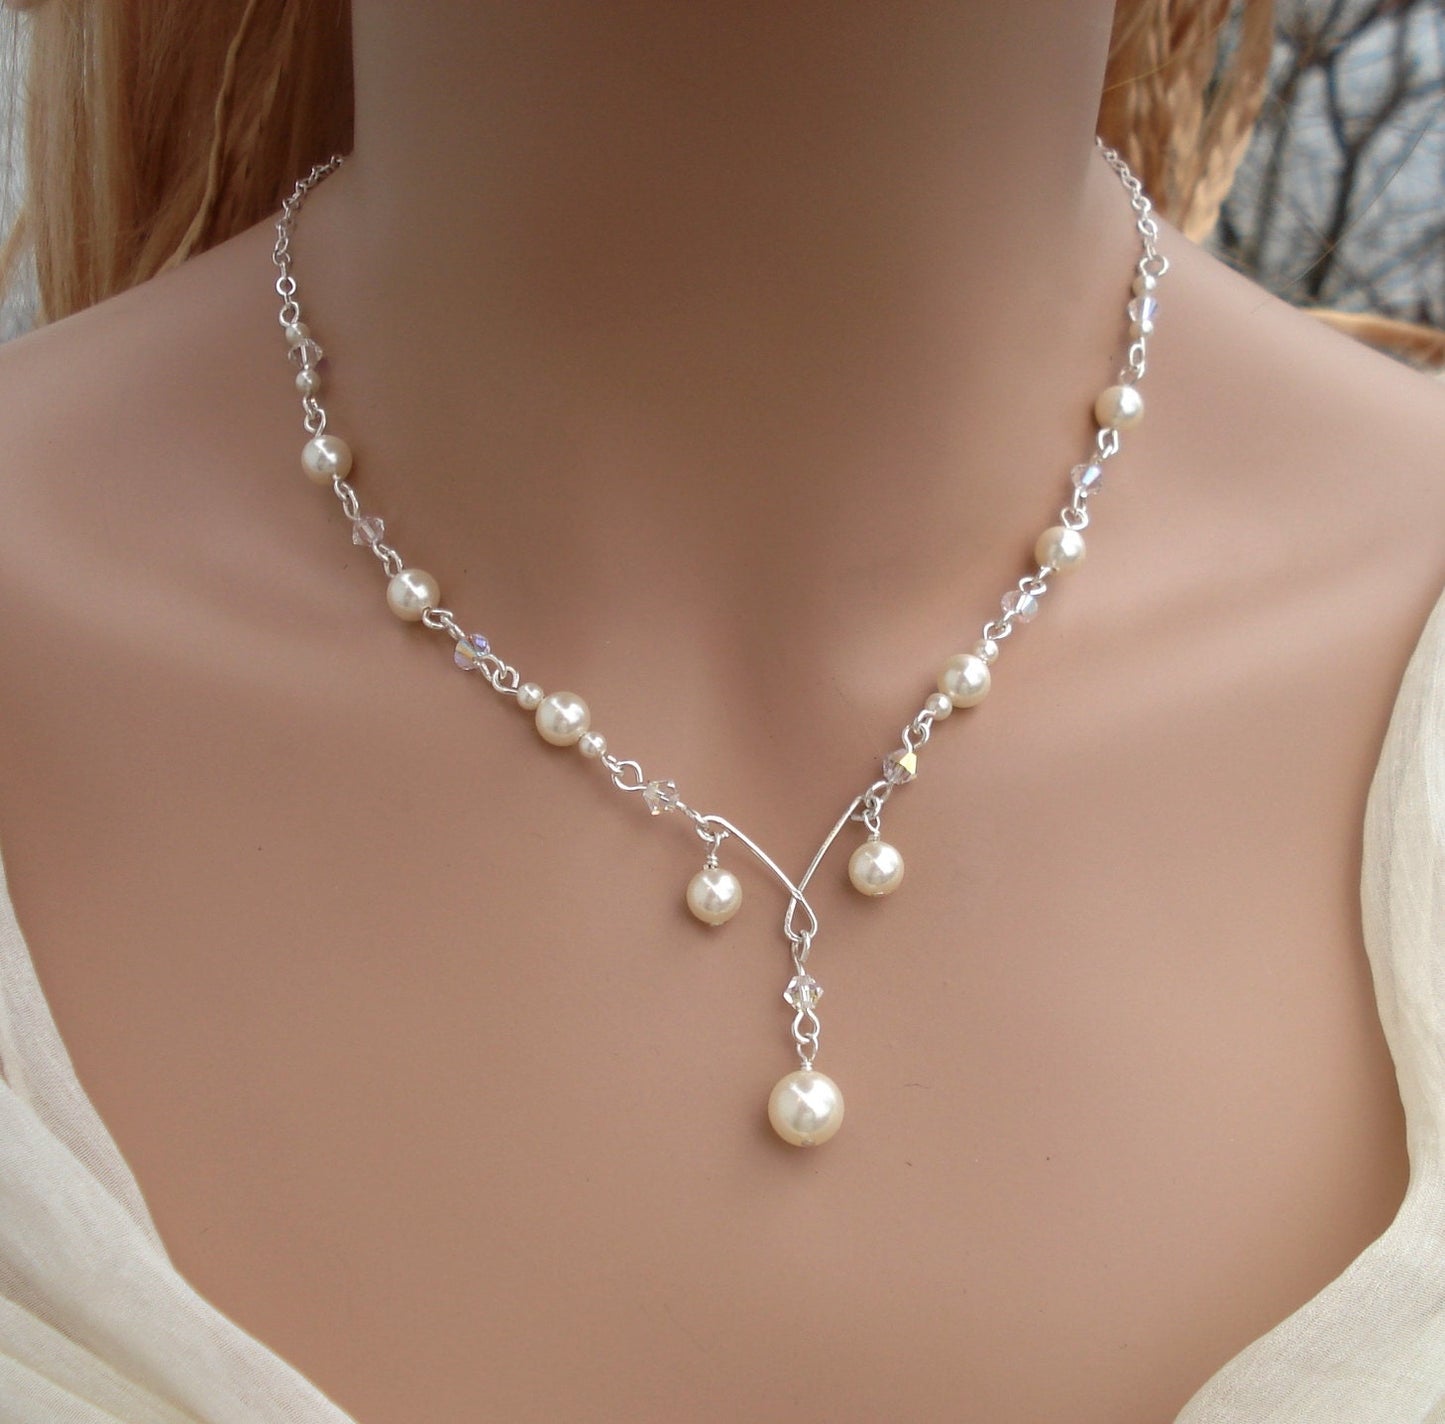 Sterling Silver Swarovski Rose Gold Pearl And Crystal Necklace,Bridesmaid Necklace, Bridal Jewelry, Infinity Pearl & Crystal Bracelet